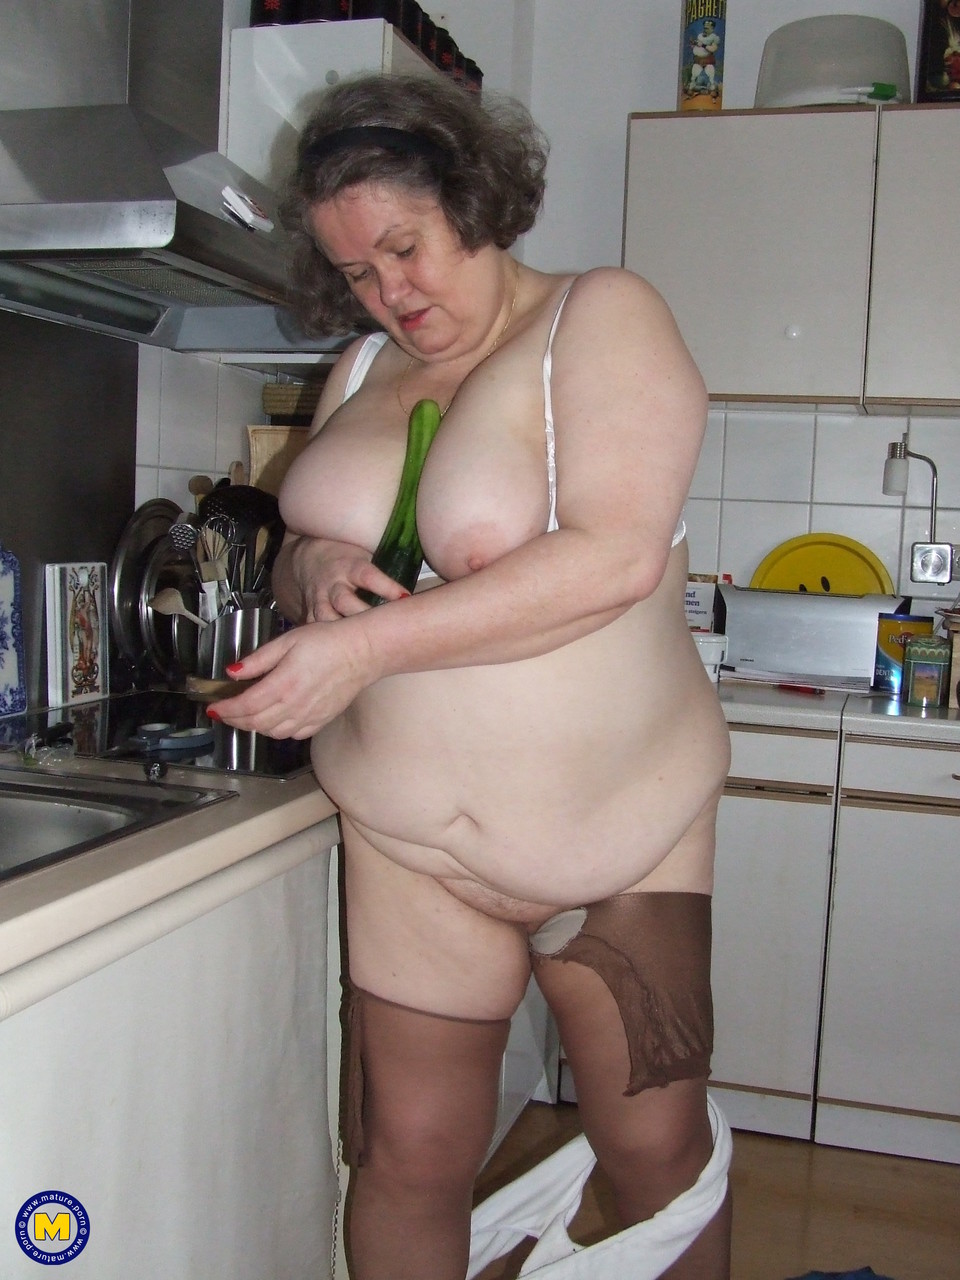 Fat mature housewife Birgid masturbates with a cucumber in the kitchen 포르노 사진 #423883225